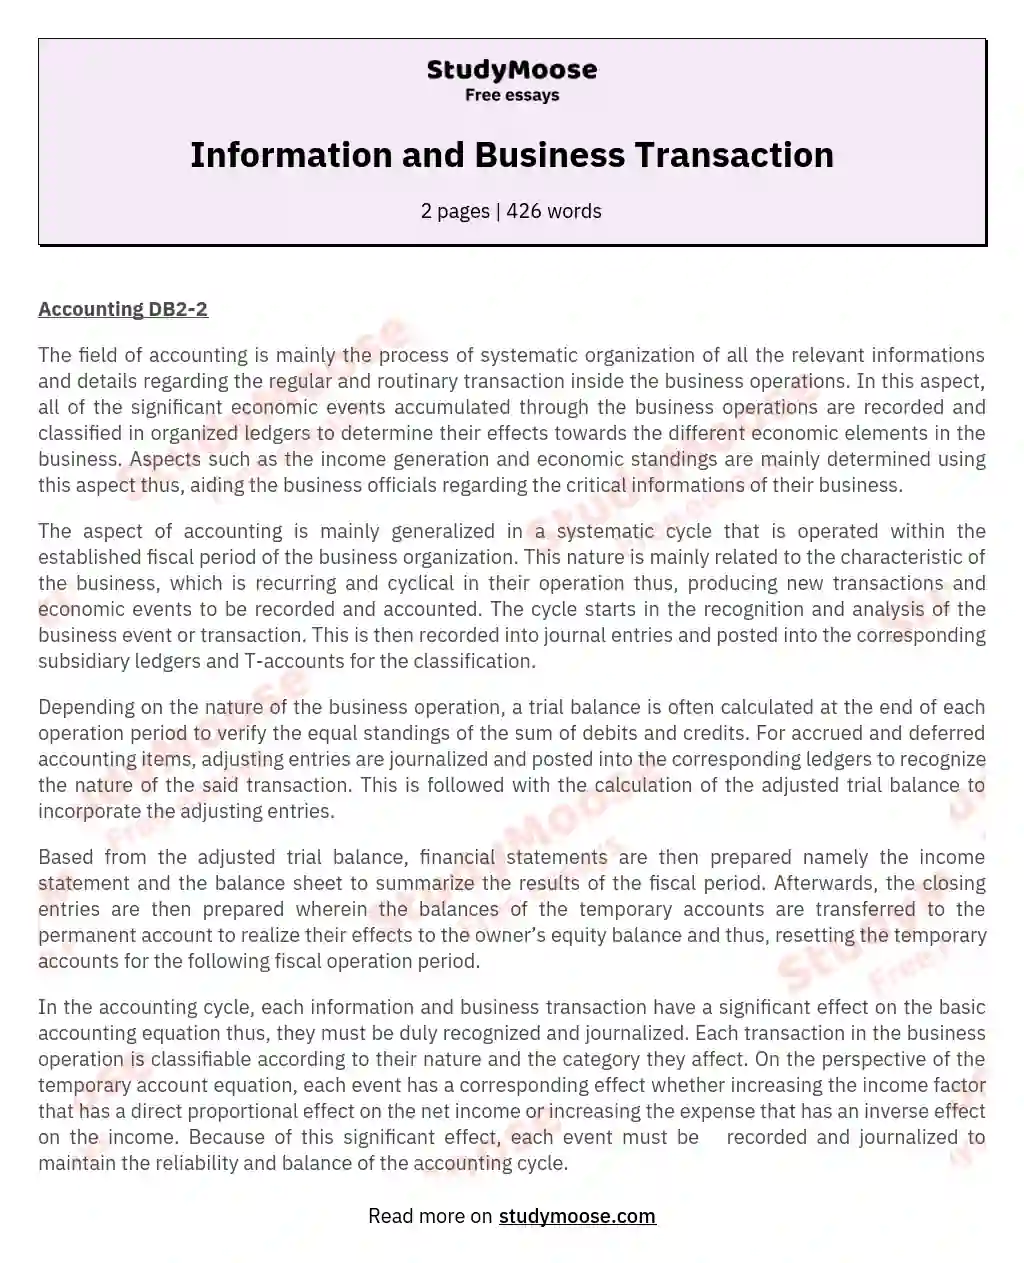 Information and Business Transaction essay